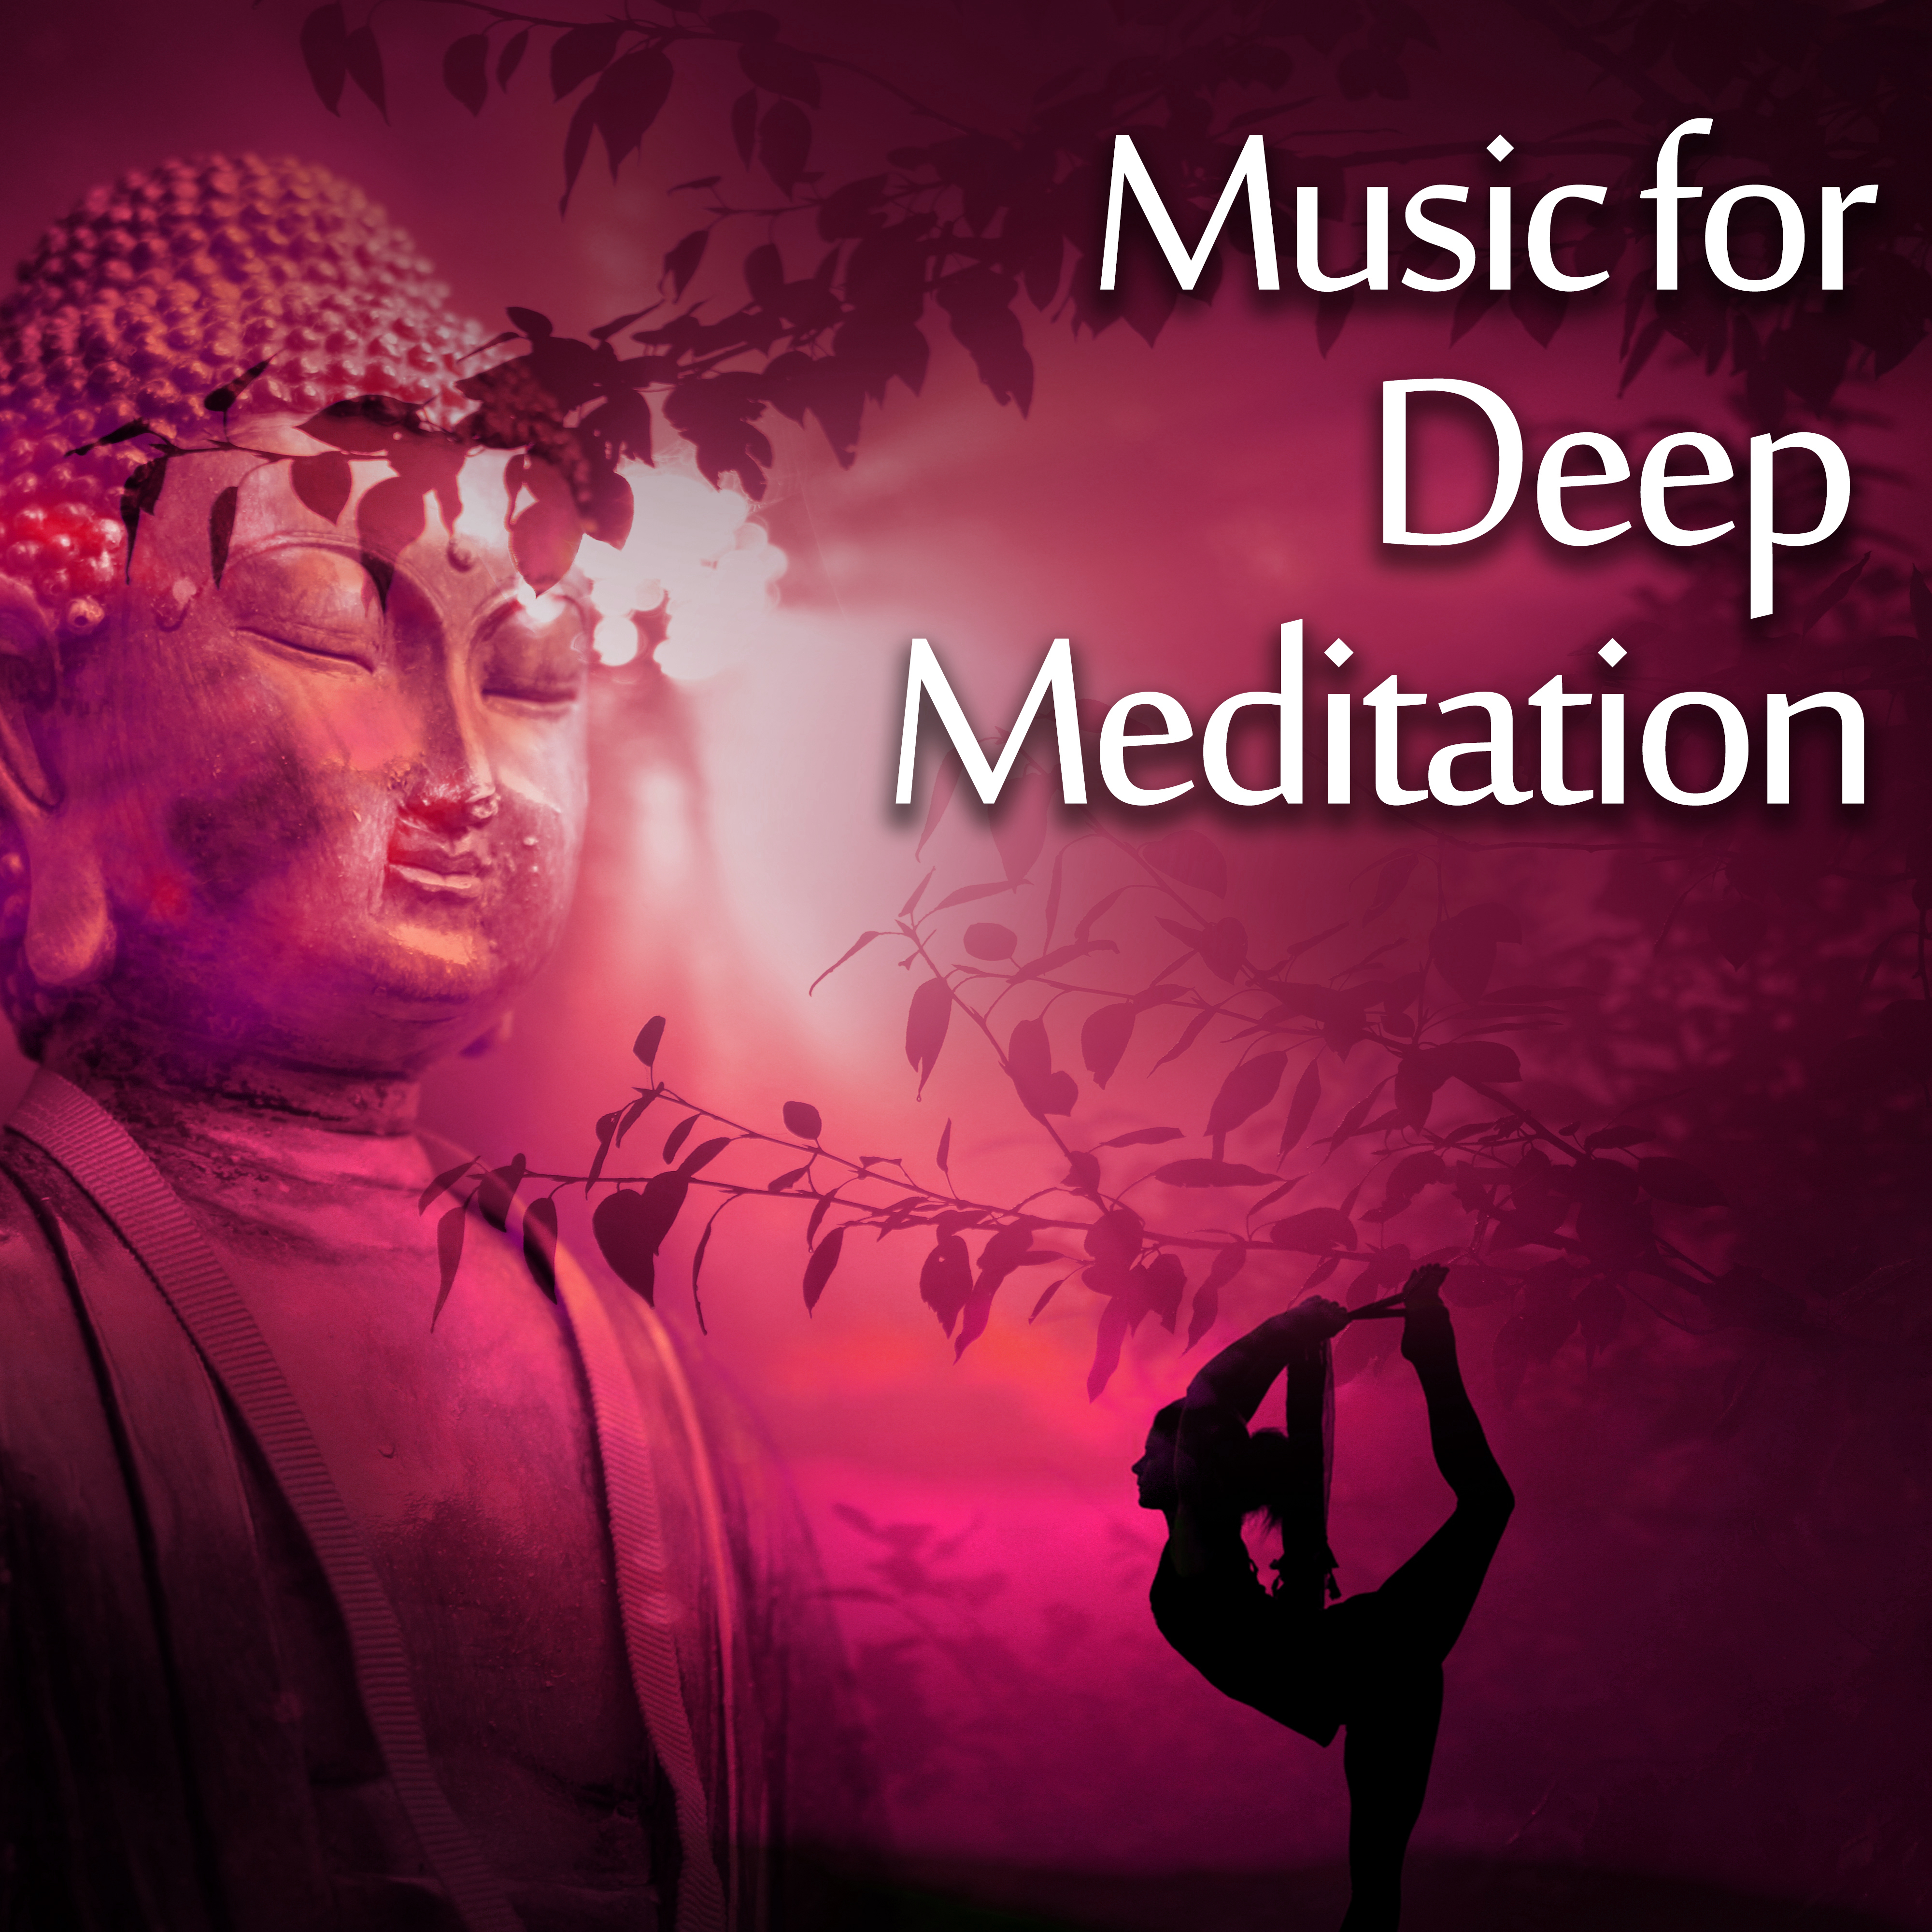 Music for Deep Meditation  Spiritual Nature Sounds, Tibetan Background Melodies, Music for Yoga, Mindfulness Training, Relaxation